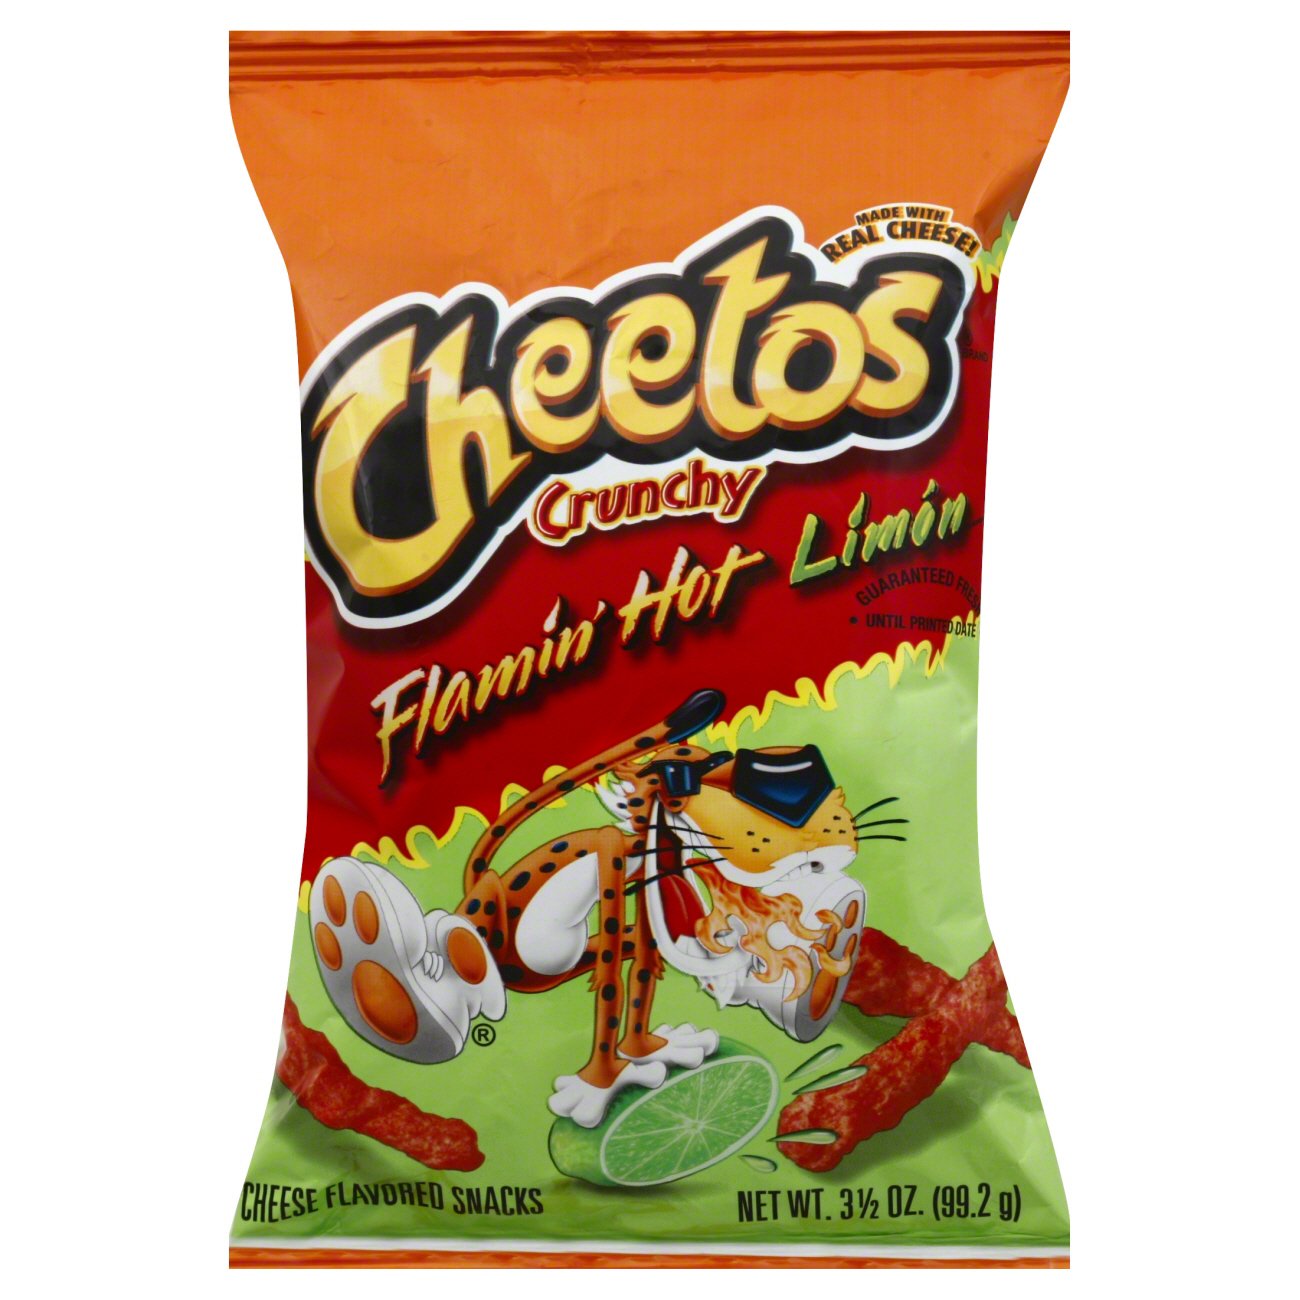 Cheetos Crunchy Flamin Hot Limon Cheese Flavored Snacks Shop Chips At H E B